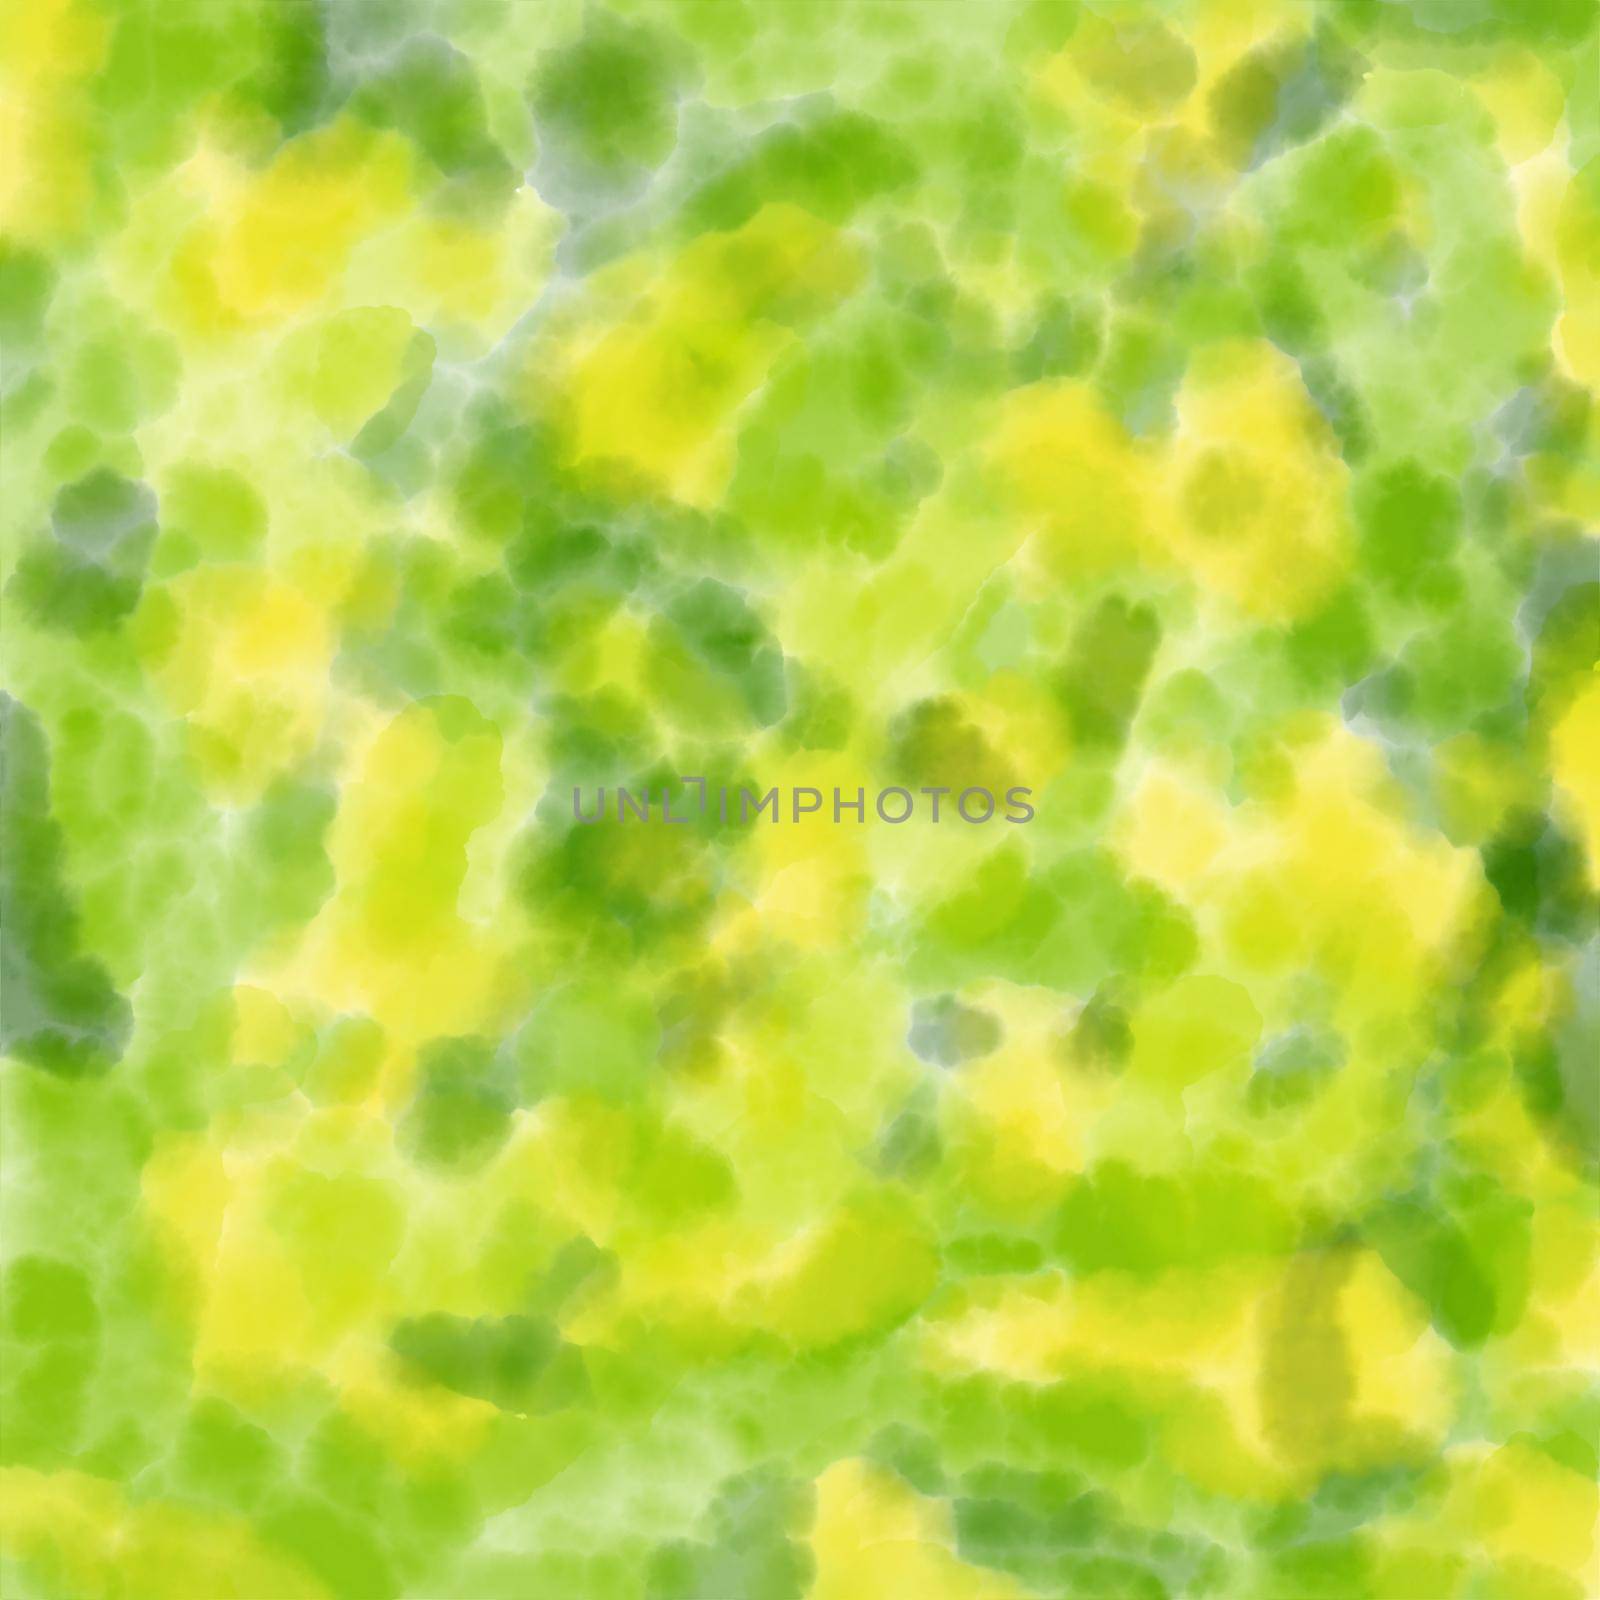 watercolor green abstract background represent ecology used for any artworks